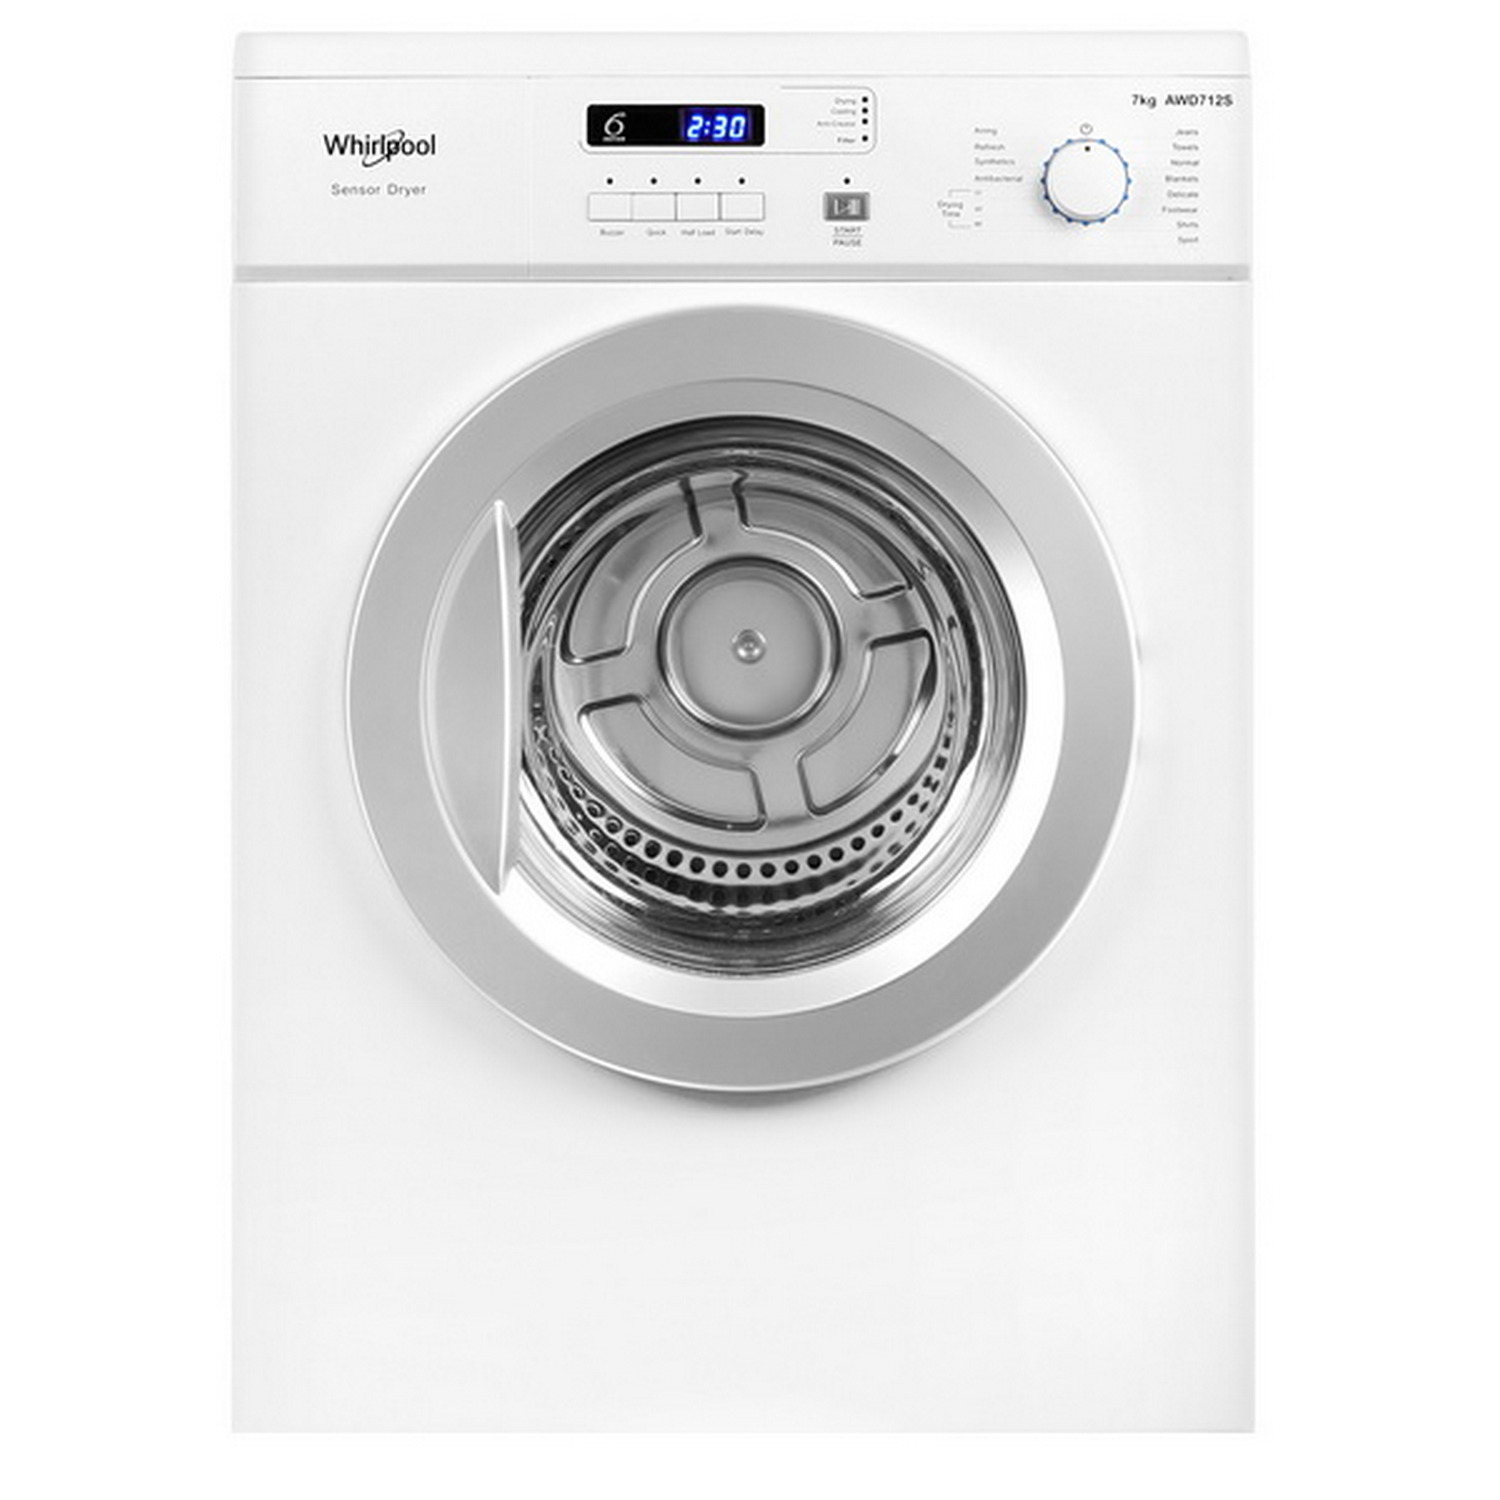 Whirlpool Front Load Dryer (7 kg) AWD712S TH+Stand